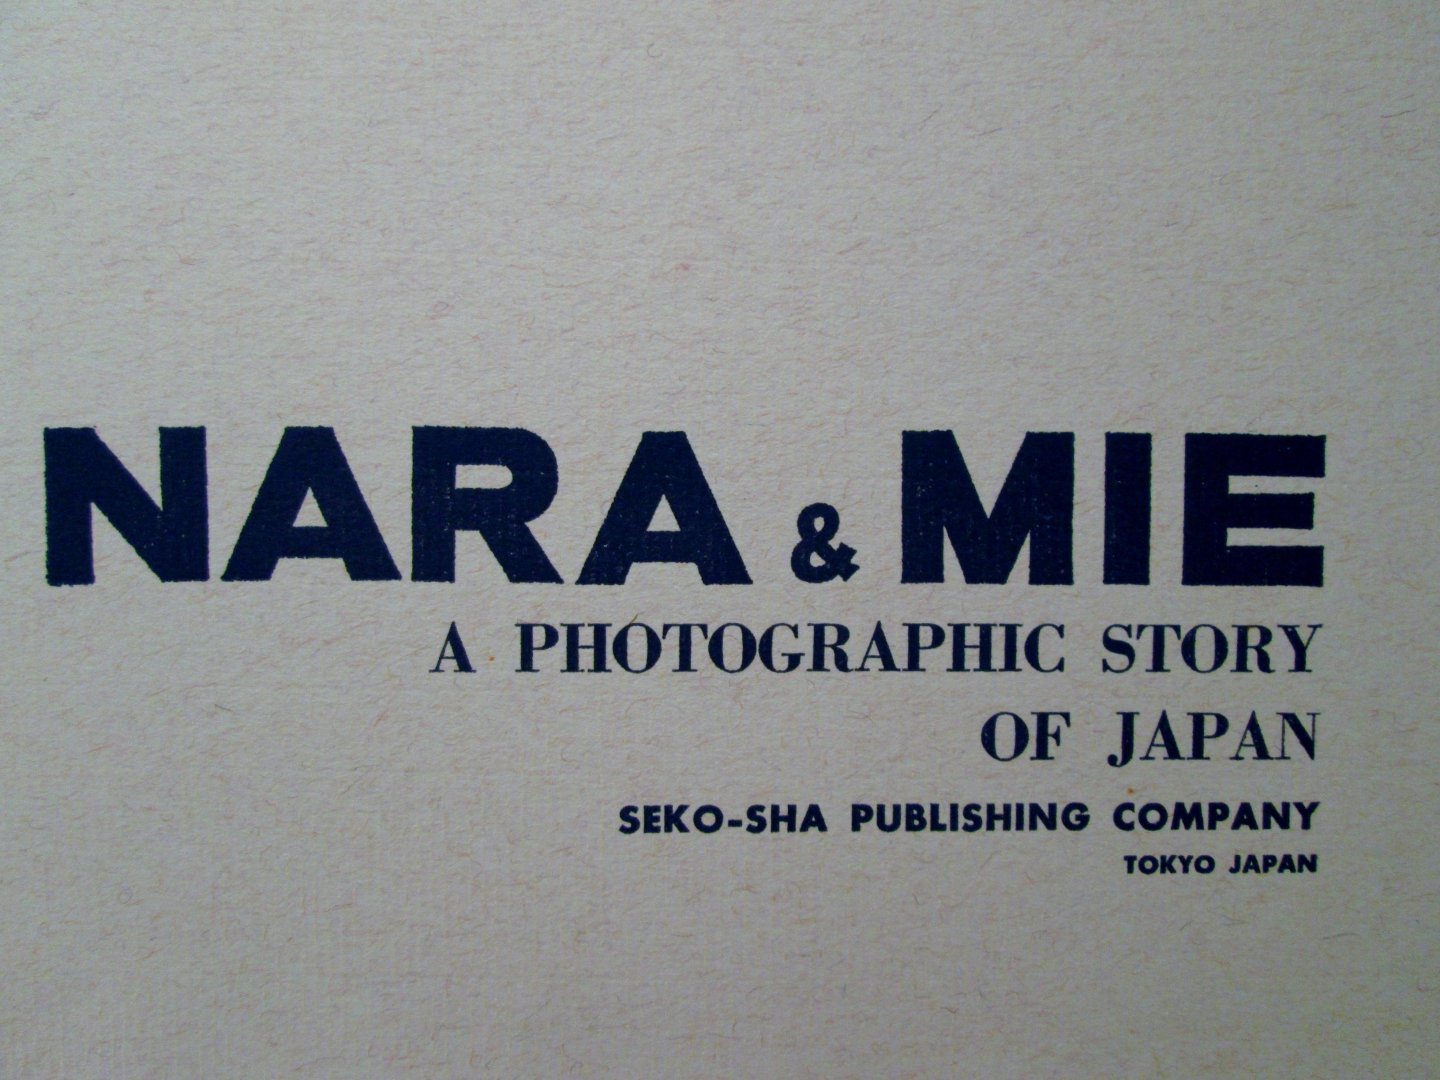  - Nara & Mie, a photographic story of Japan  (mainly b/w photography)